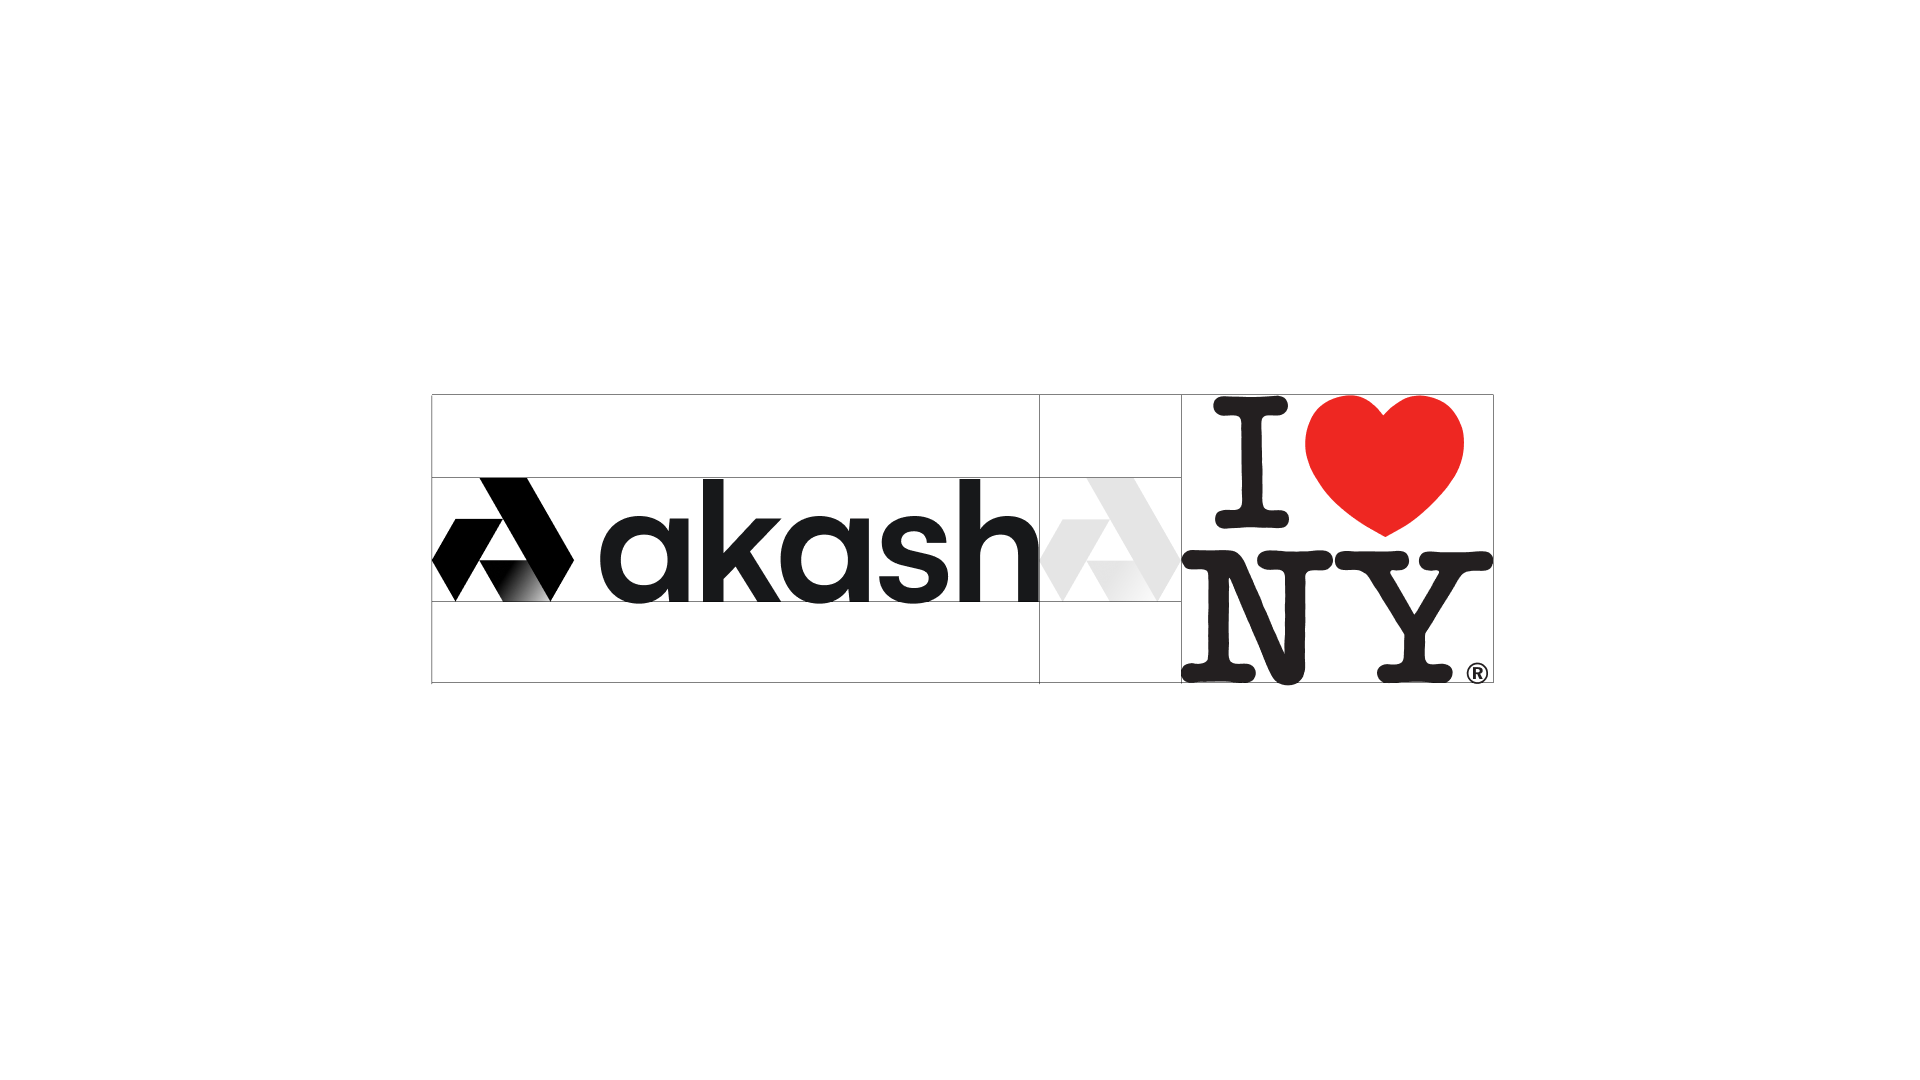 akash network - brand identity, guideline and assets.